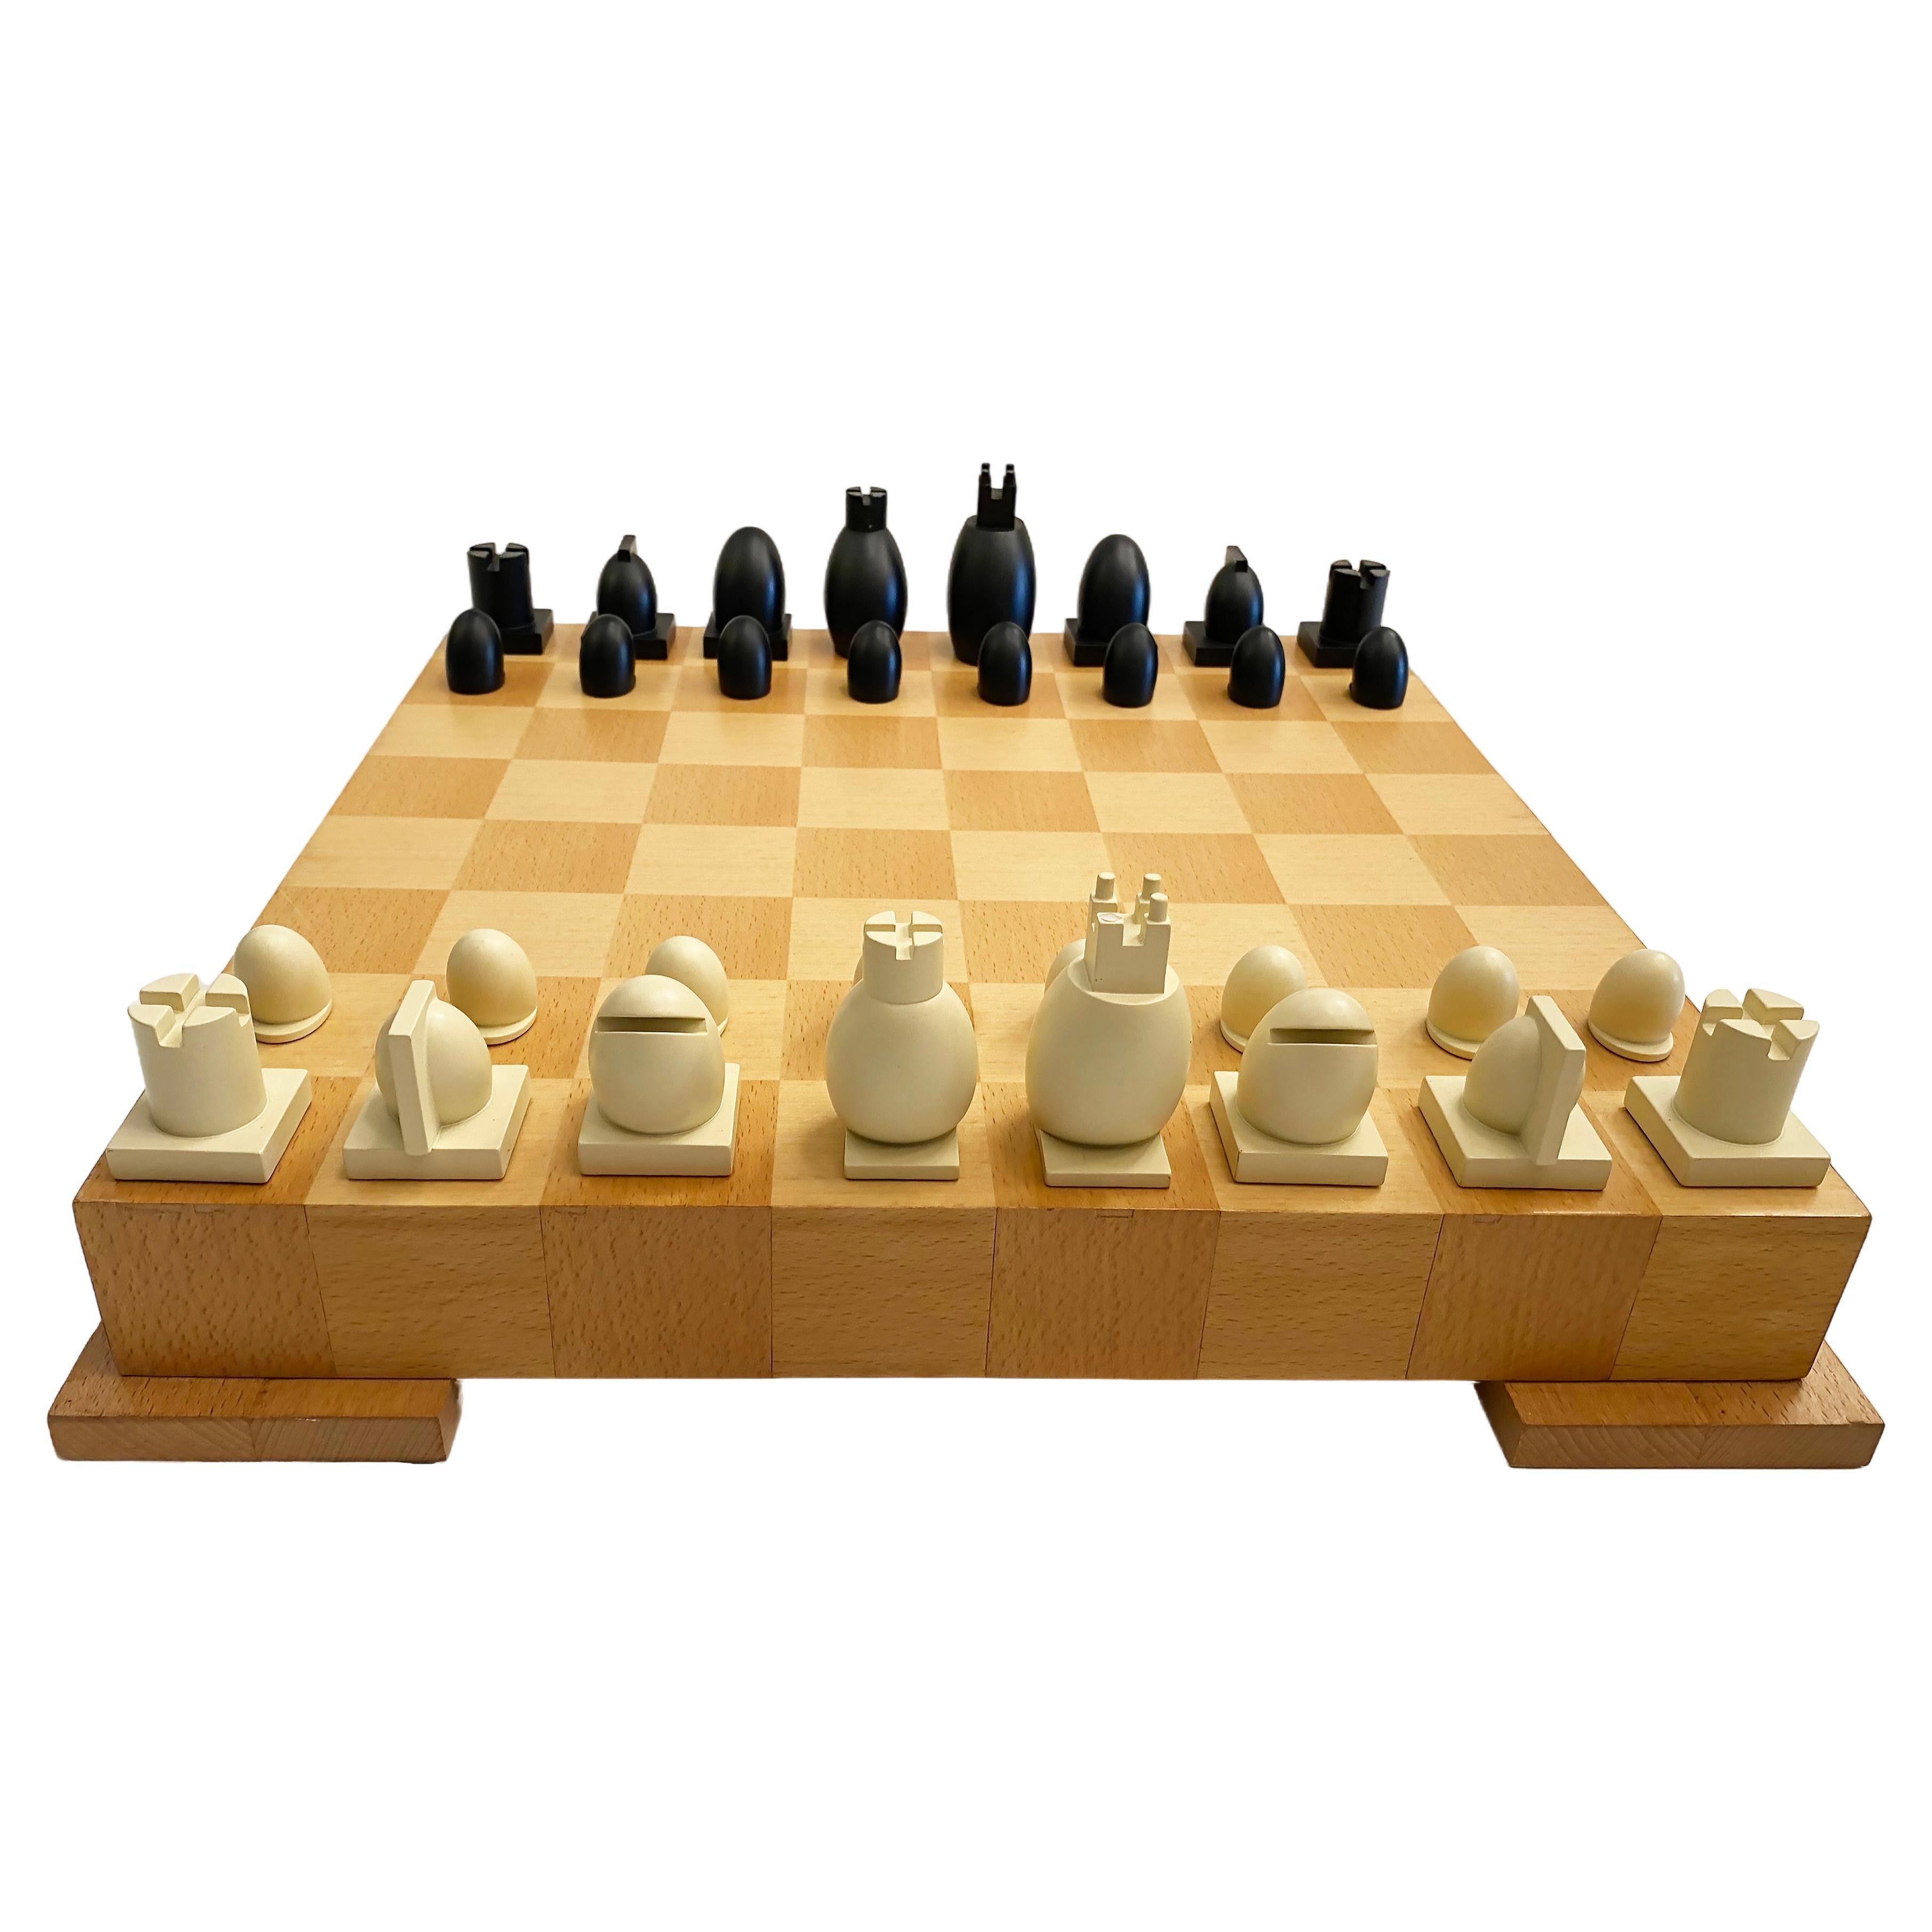 Michael Graves Post-modern Chess / Checkers Set Board Game and Pieces